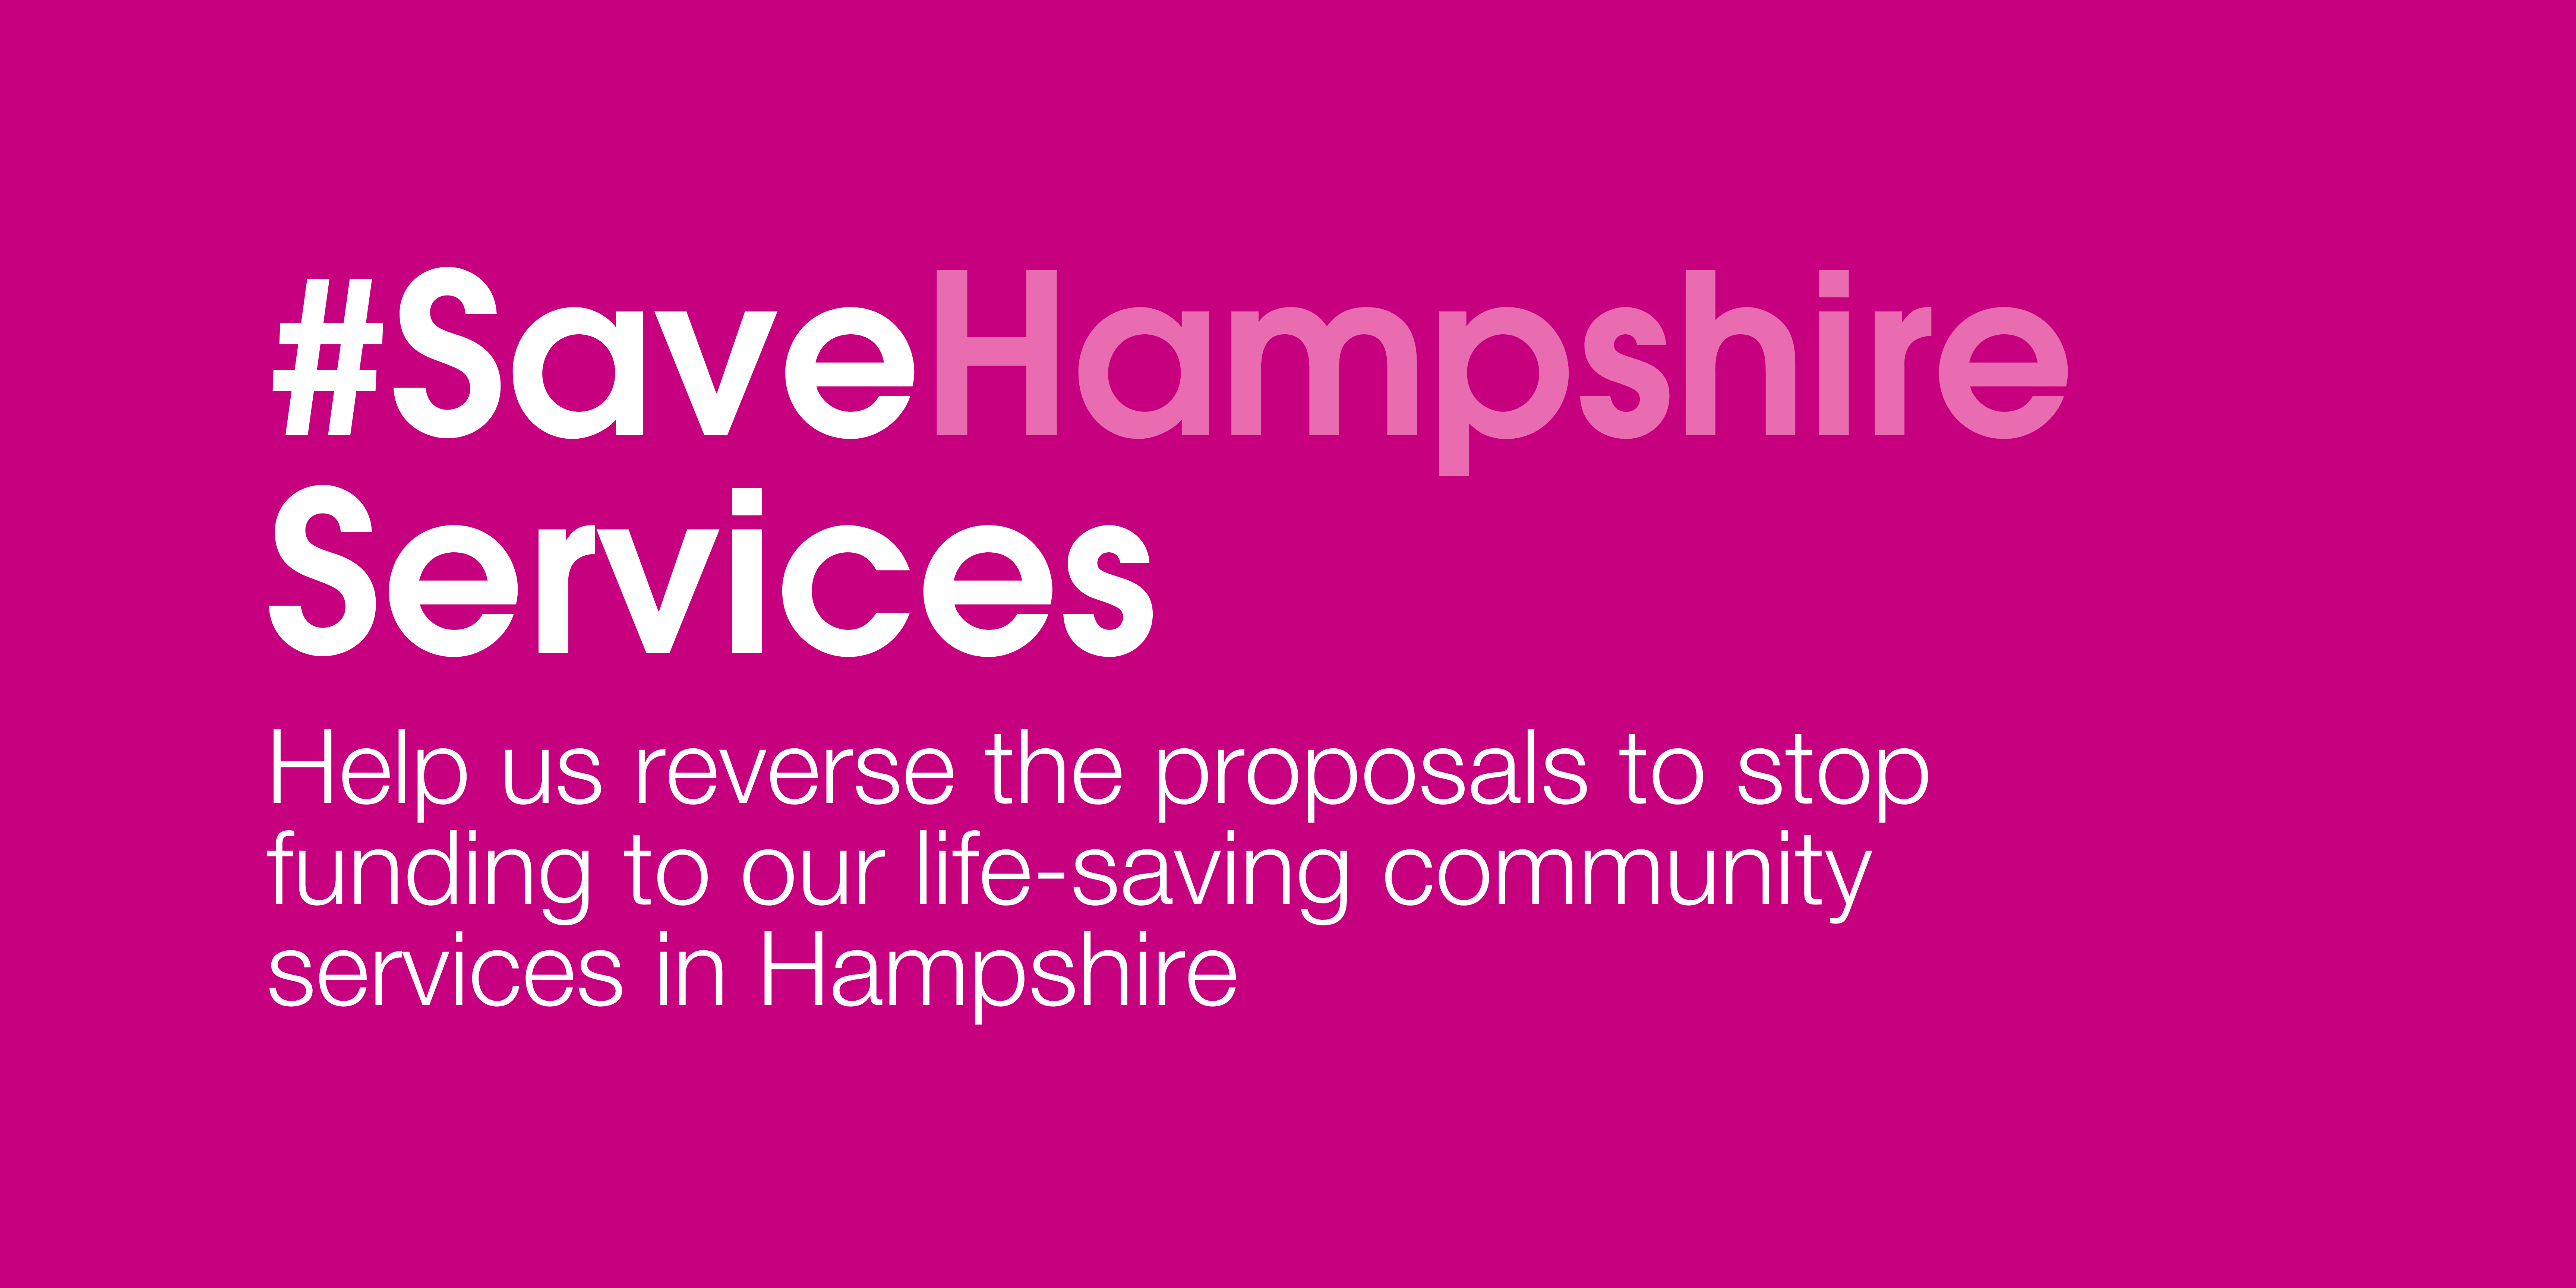 MHA launches report to highlight value of community grants, as Hampshire County Council considers cuts